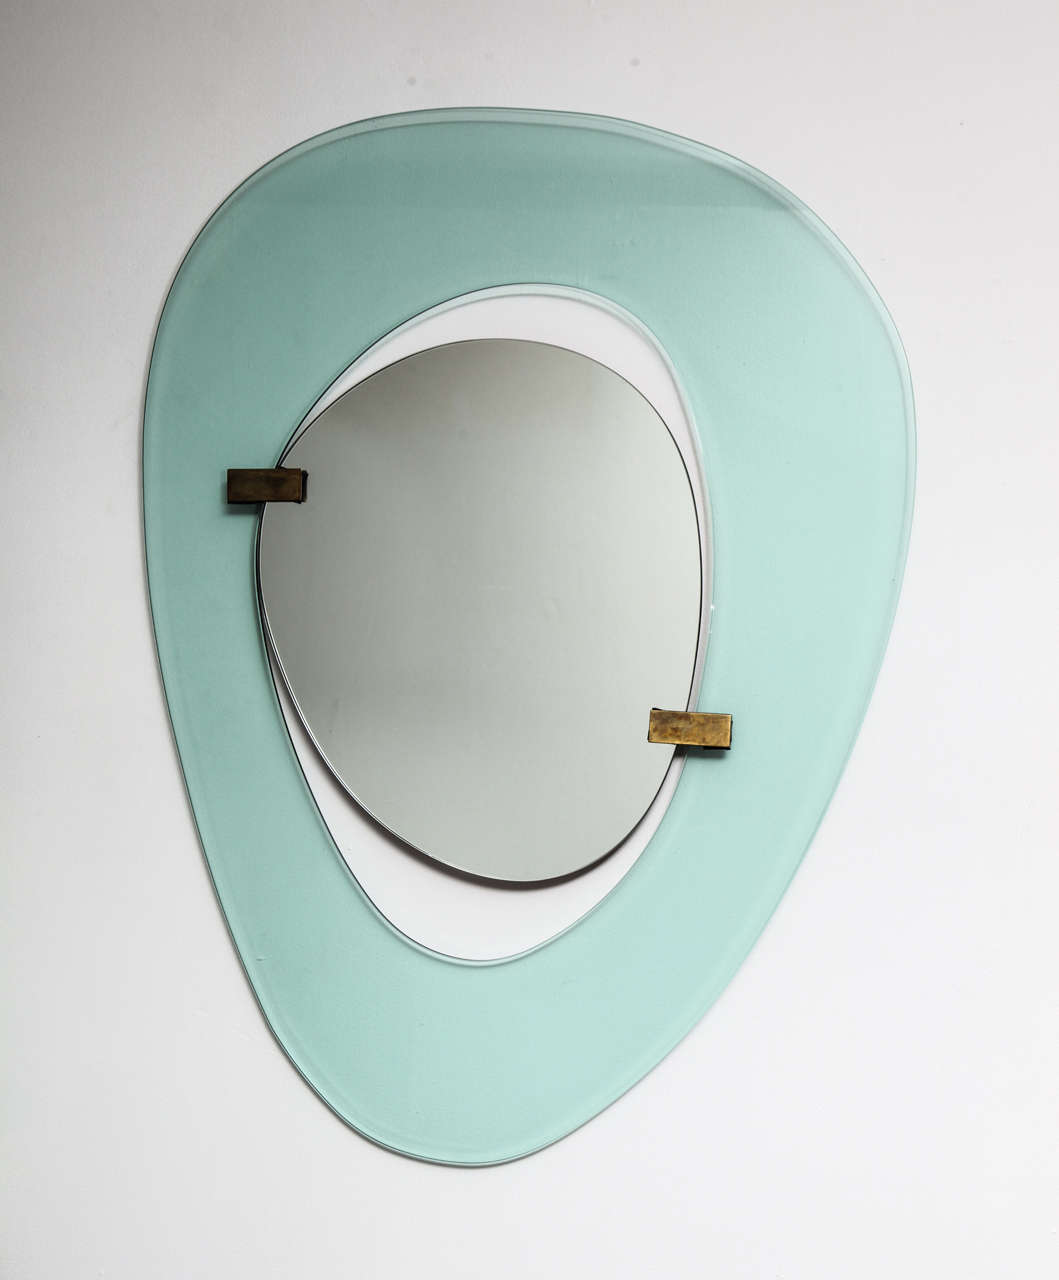 Crystal surround in sea-foam green, with floating central mirror and brass mounts.  This rare model was conceived during the height of Fontana Arte's post-war creative period and while the company was under the design direction of Max Ingrand.